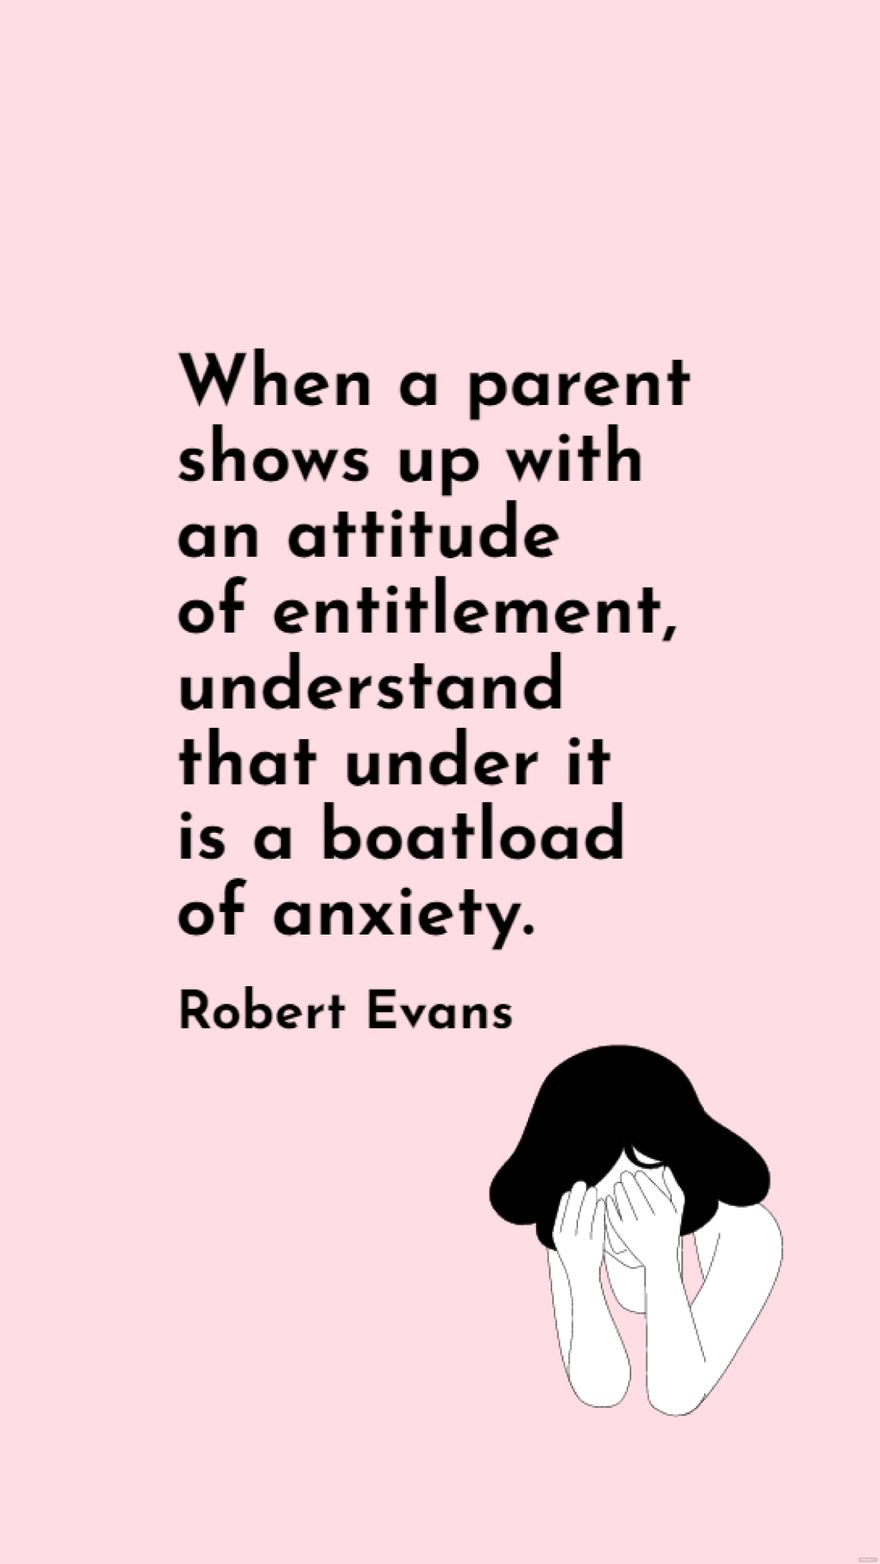 Robert Evans - When a parent shows up with an attitude of entitlement, understand that under it is a boatload of anxiety.